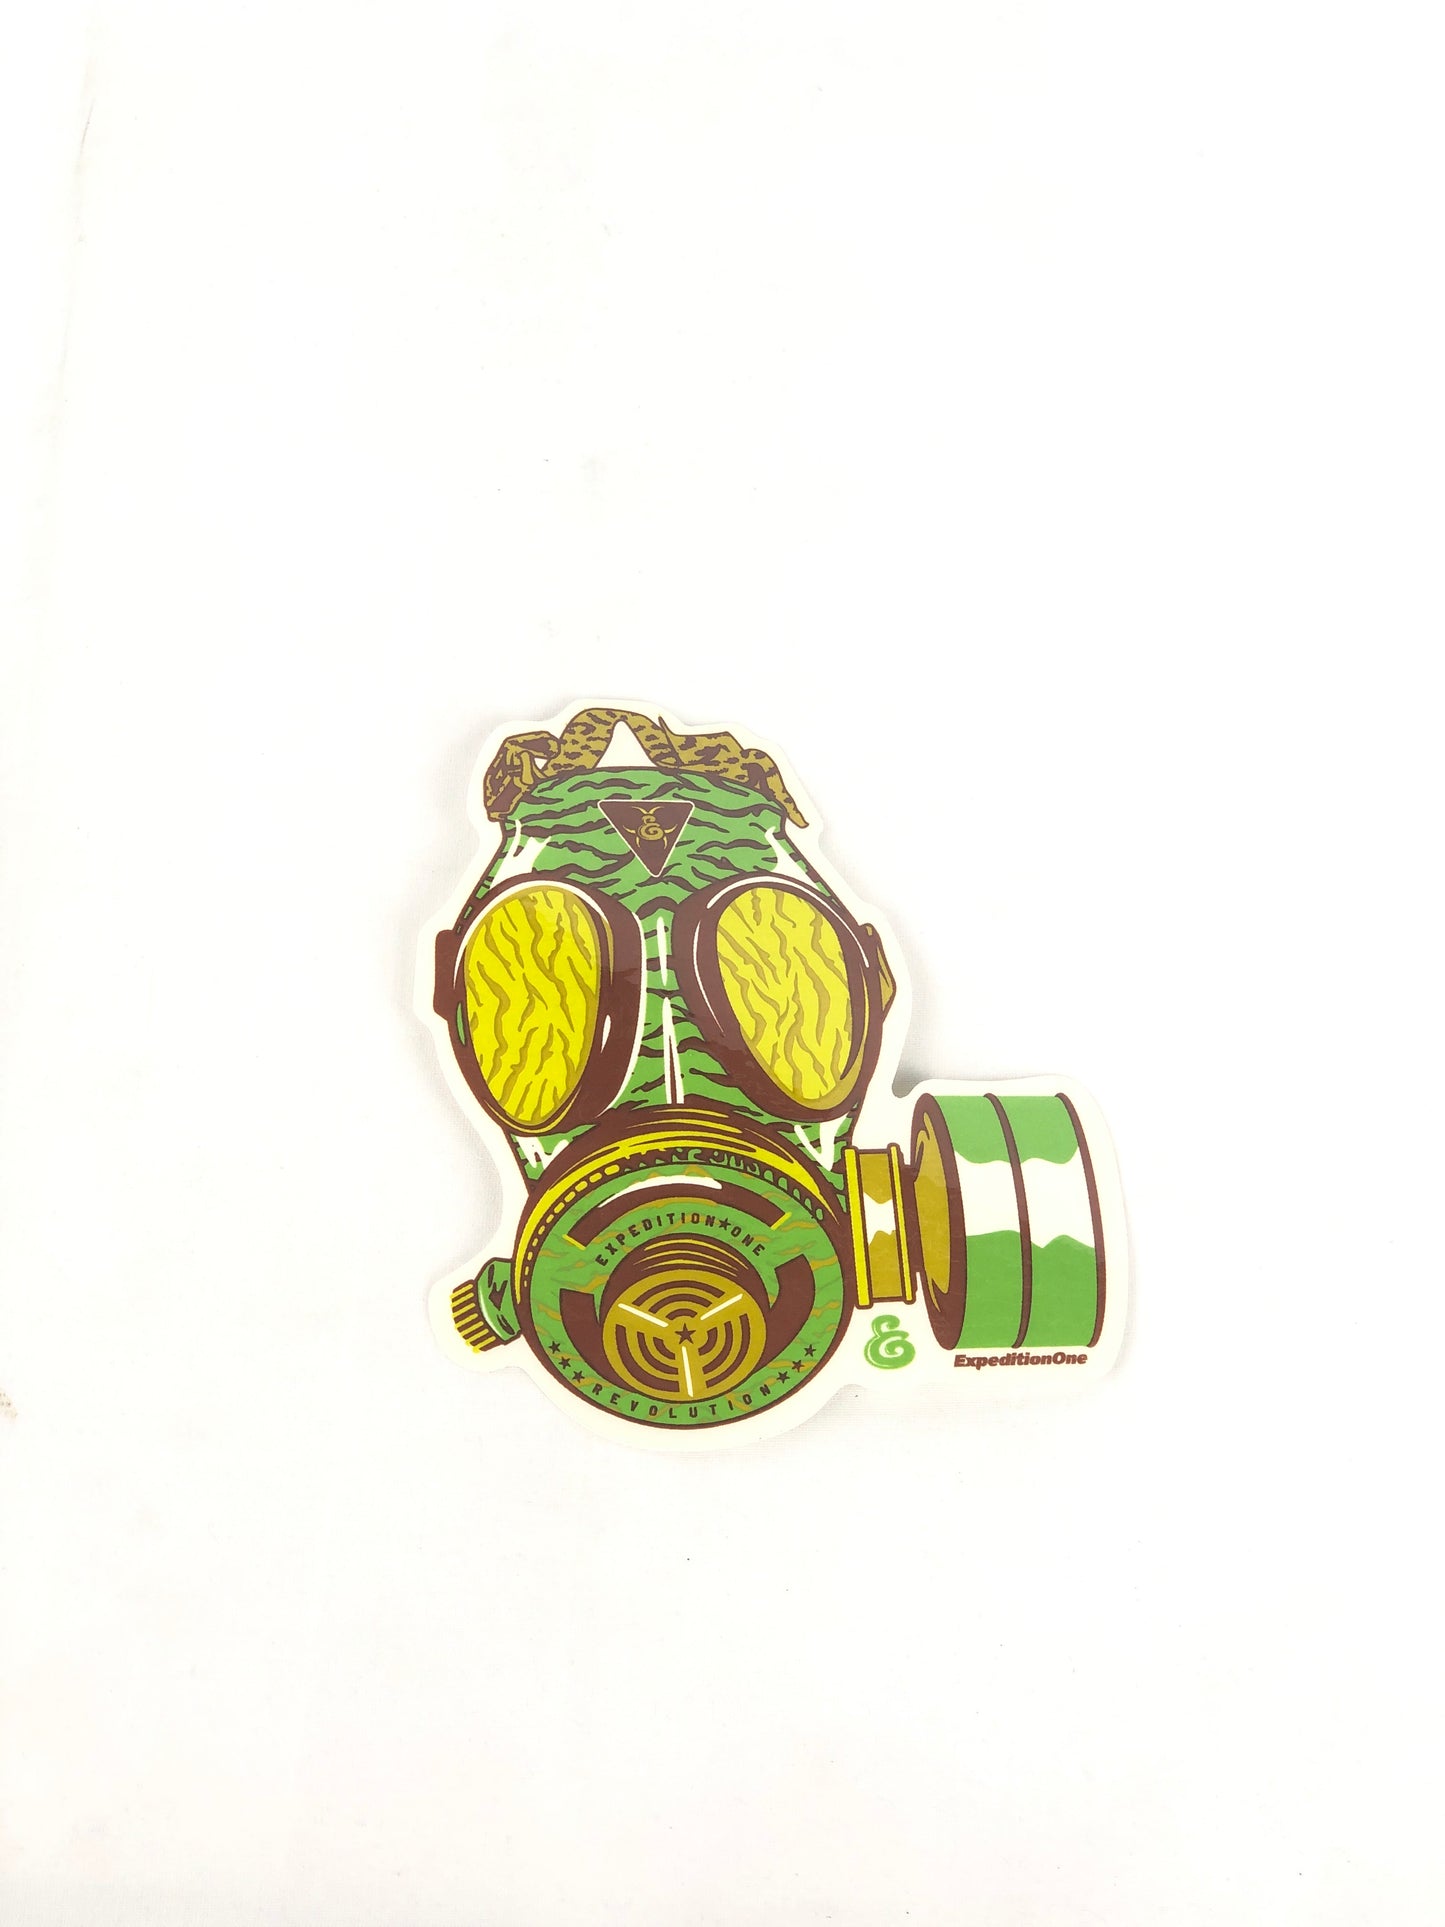 Expedition One Gas Mask Revolution Clear Green Yellow 5.5" x 5" Sticker